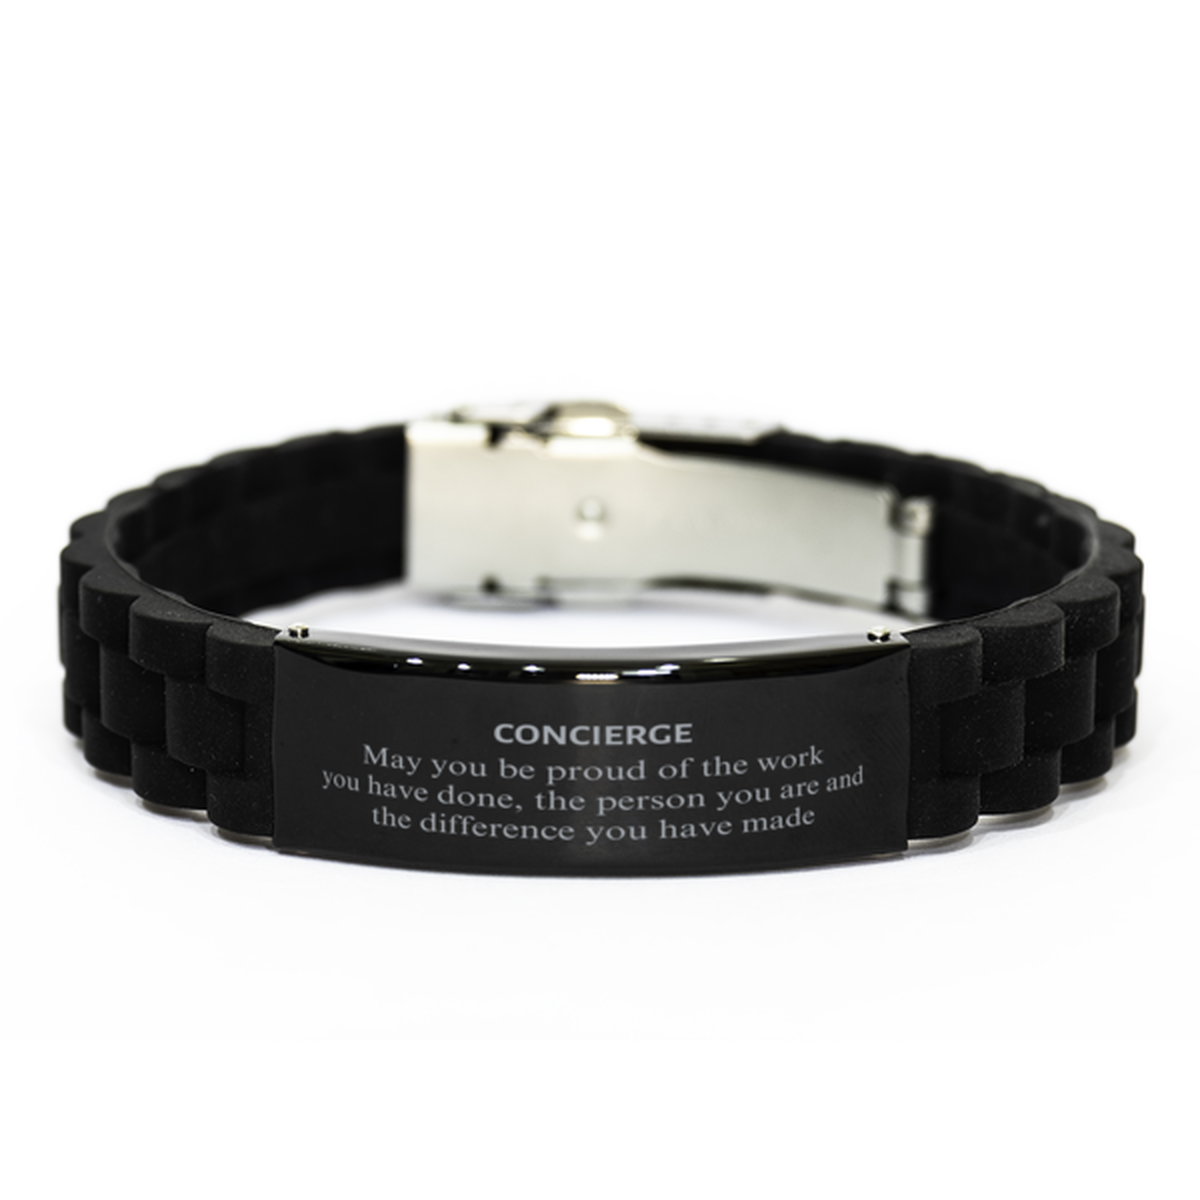 Concierge May you be proud of the work you have done, Retirement Concierge Black Glidelock Clasp Bracelet for Colleague Appreciation Gifts Amazing for Concierge